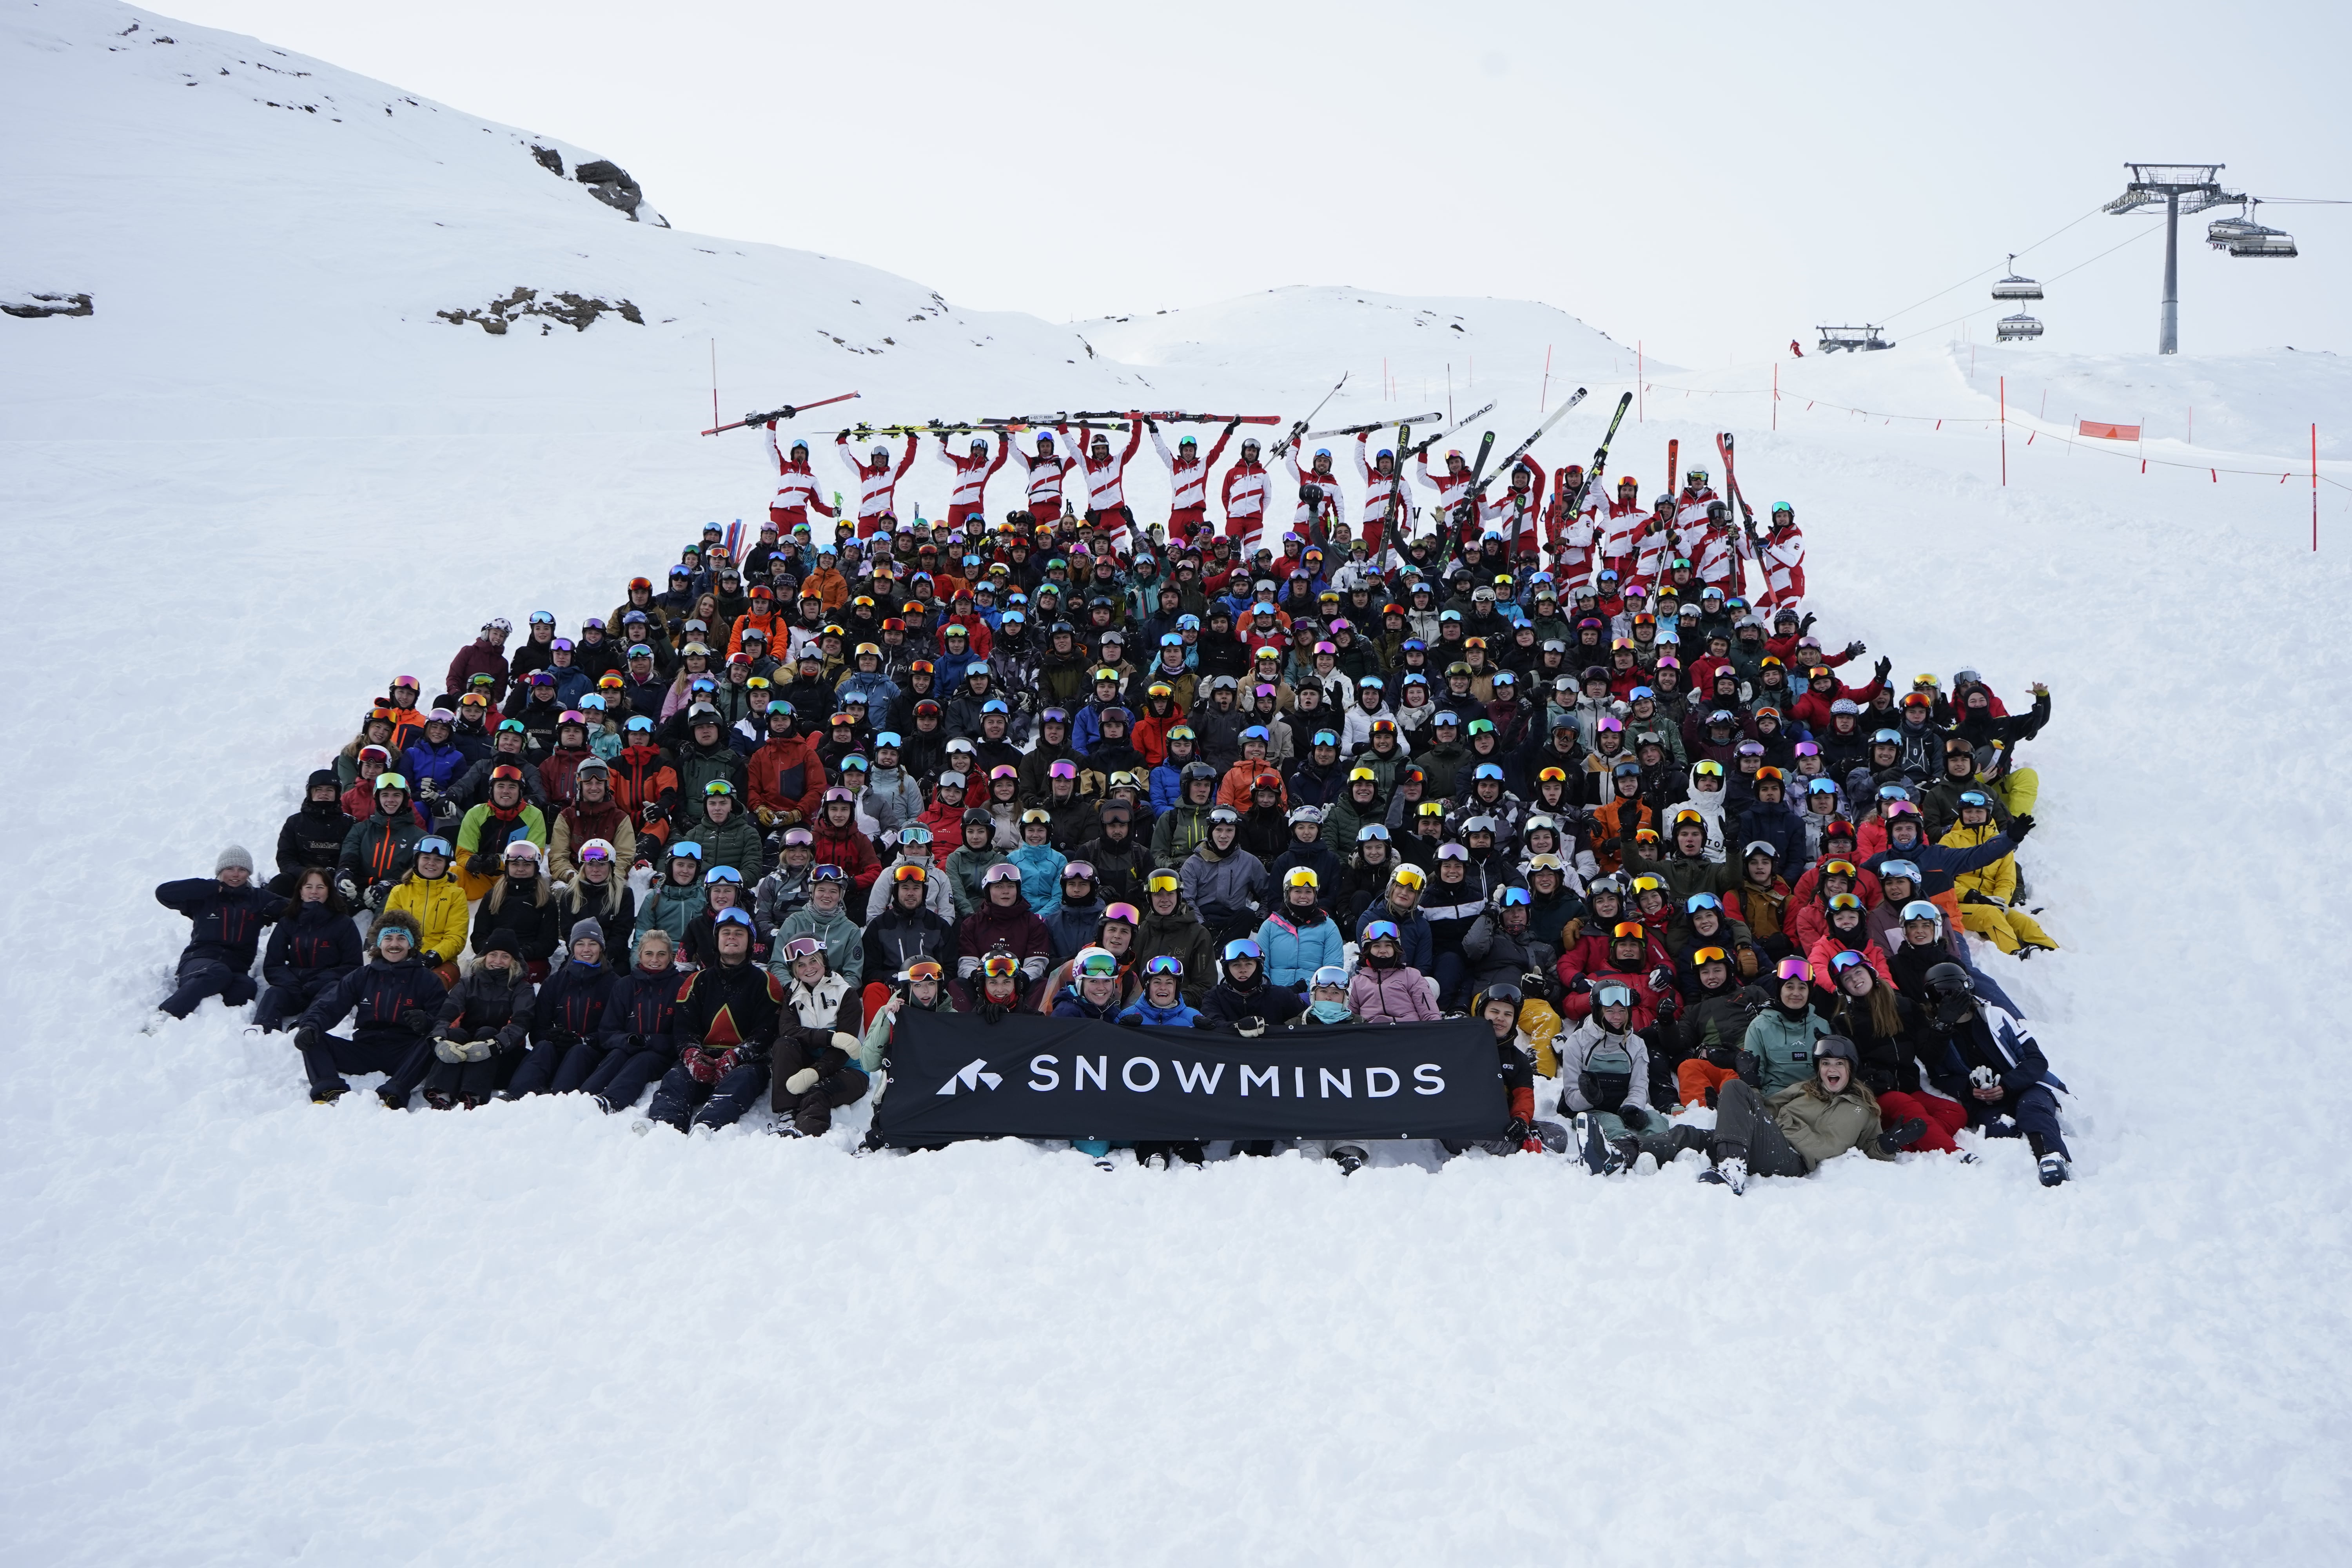 Snowminds kundeservice